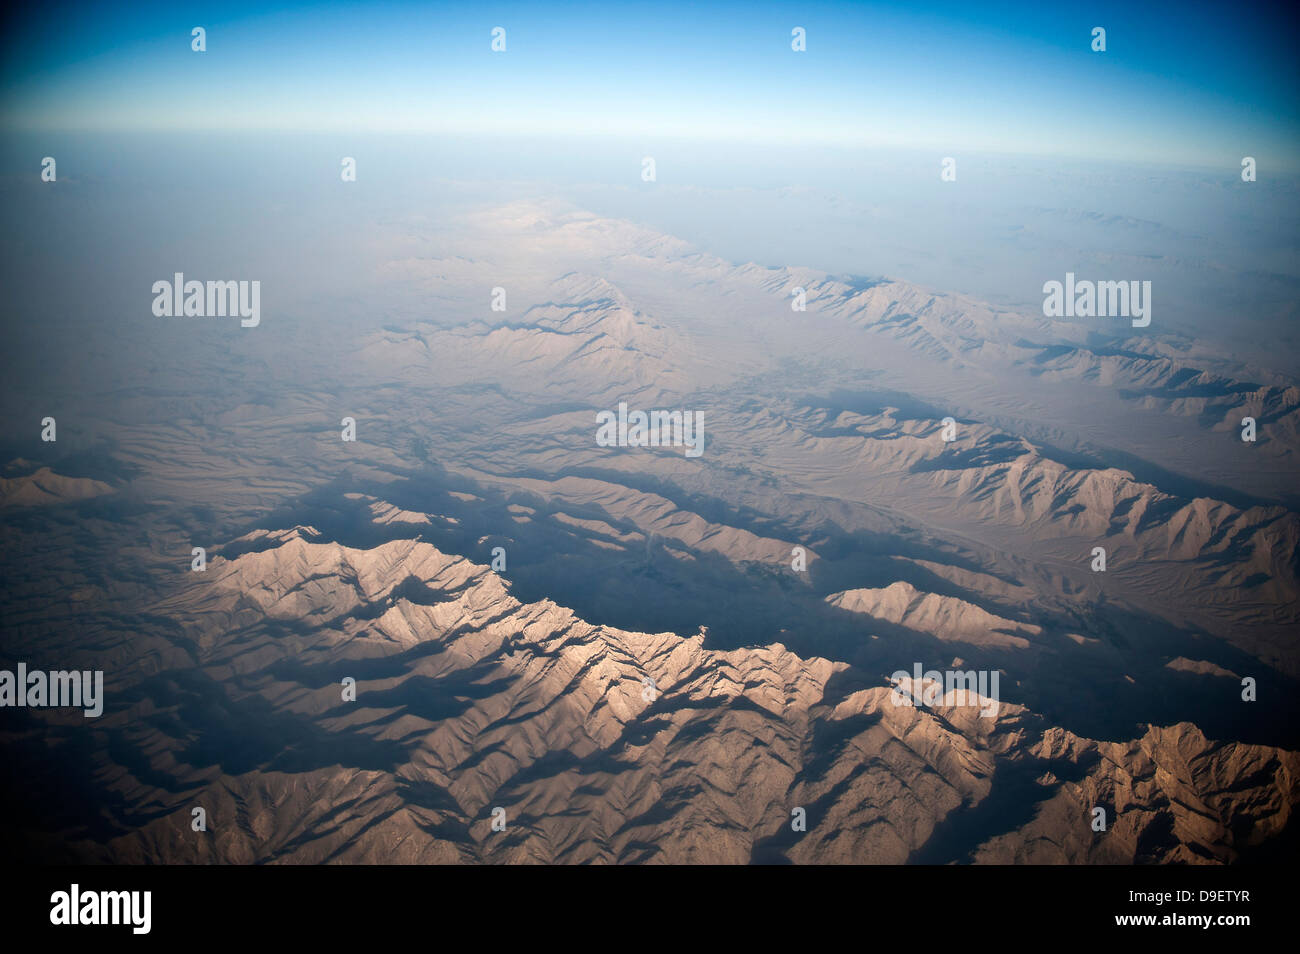 Aerial view of the mountainous landscape of Southern Afghanistan Stock Photo